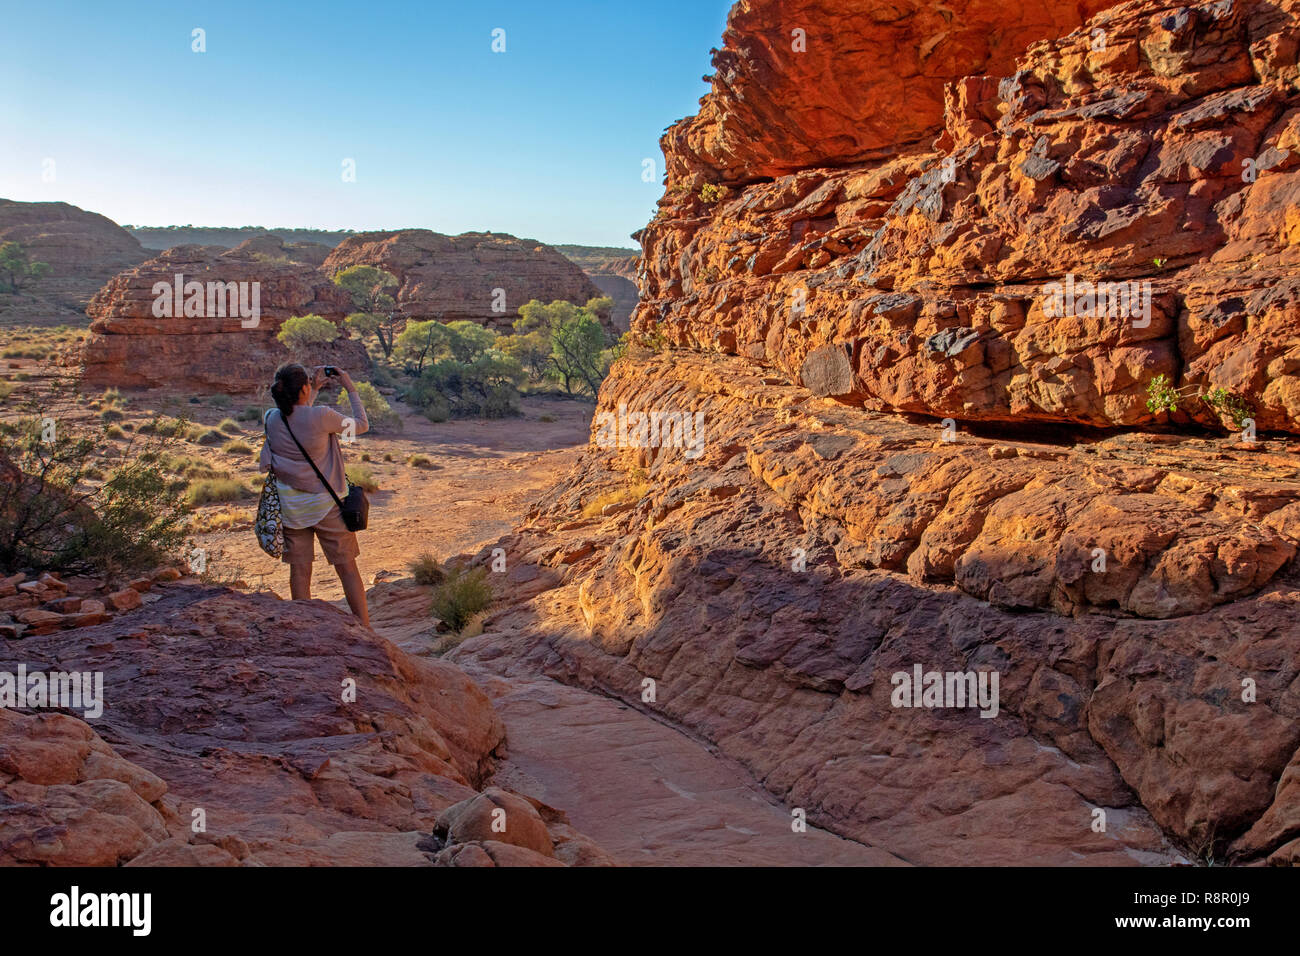 Hiker in the Lost City atop the Kings Canyon rim Stock Photo